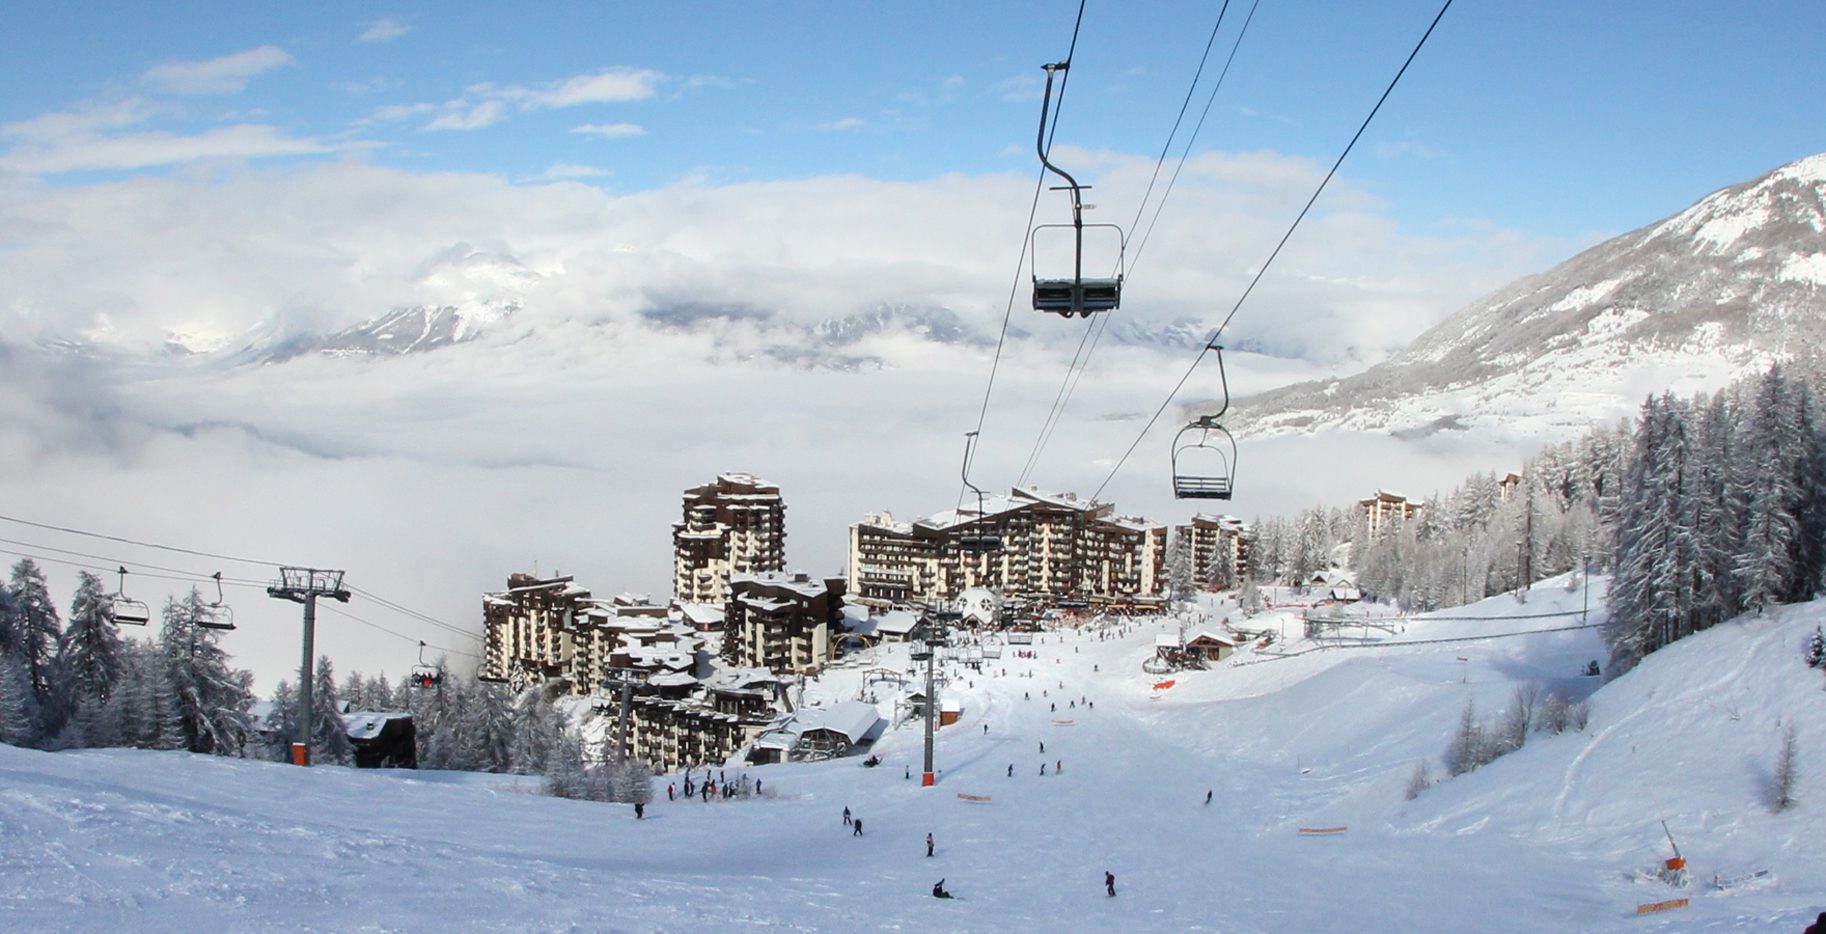 A view looking back at the village of Les Orres from a ski lift